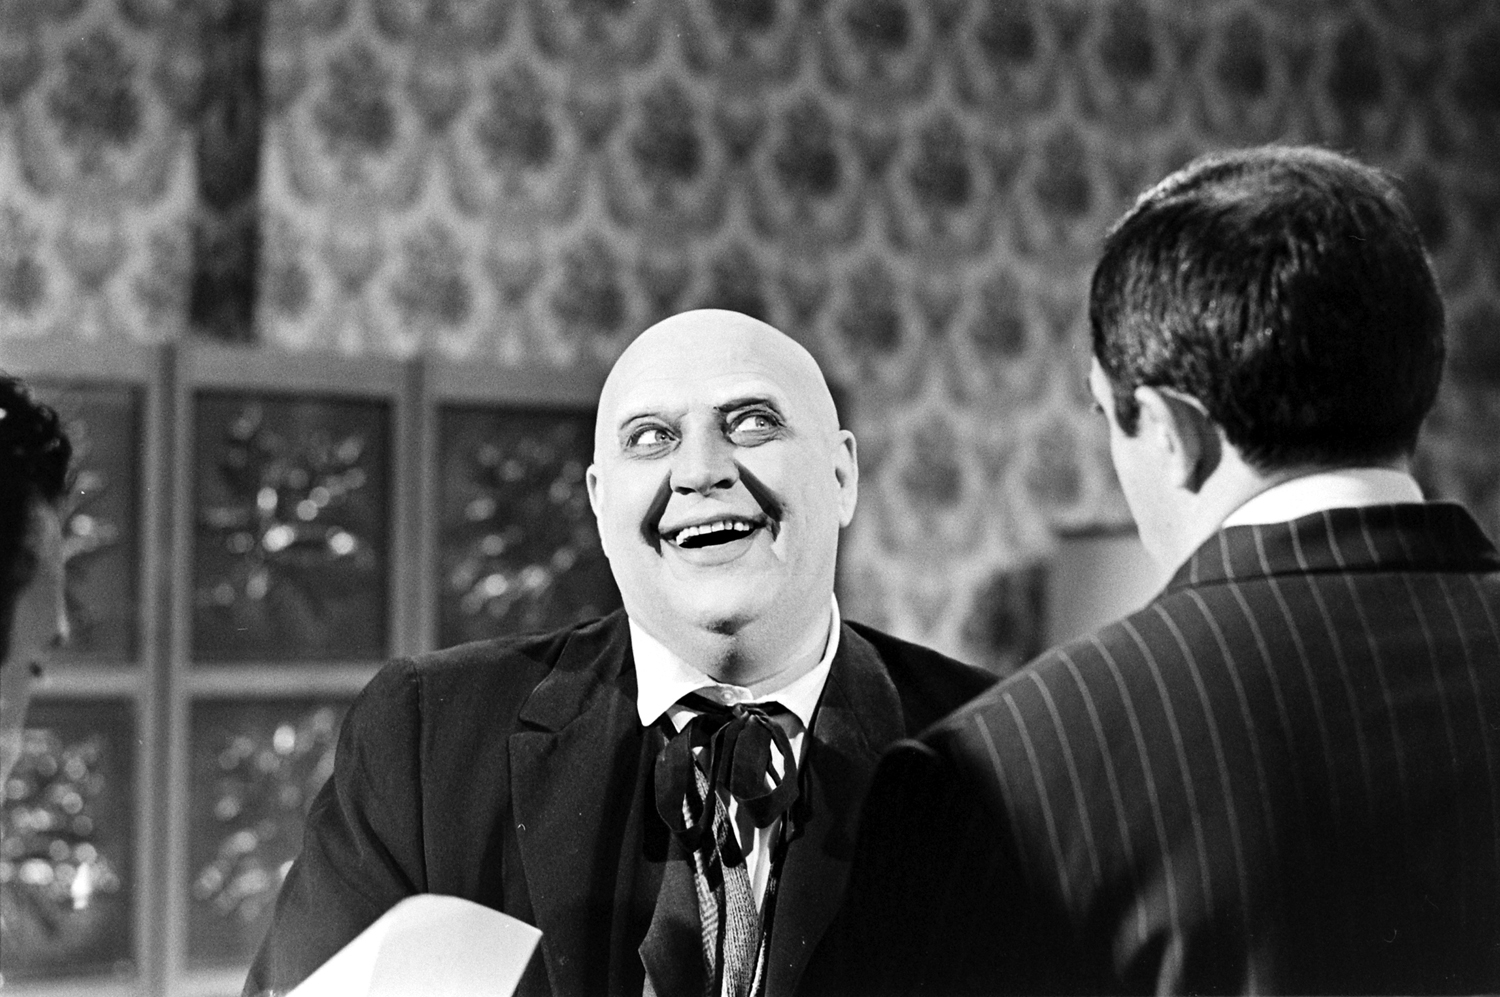 John Astin with an actor auditioning for the role of Uncle Fester, 1964.